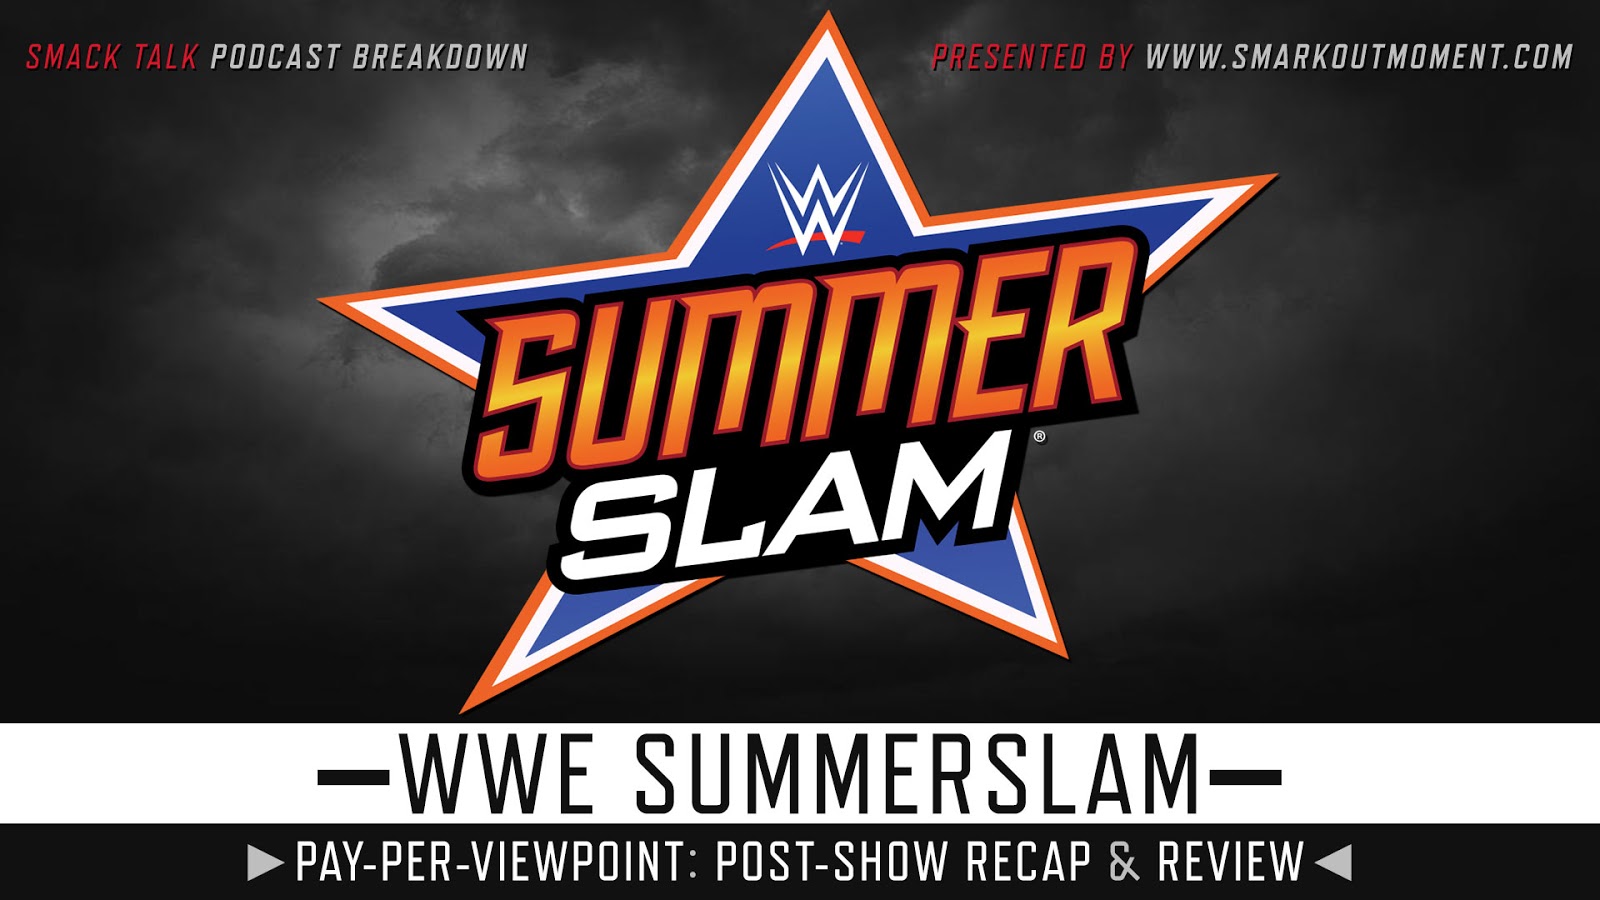 Wwe Summerslam Recap Review Pay Per Viewpoint Post Show Smark Out Moment